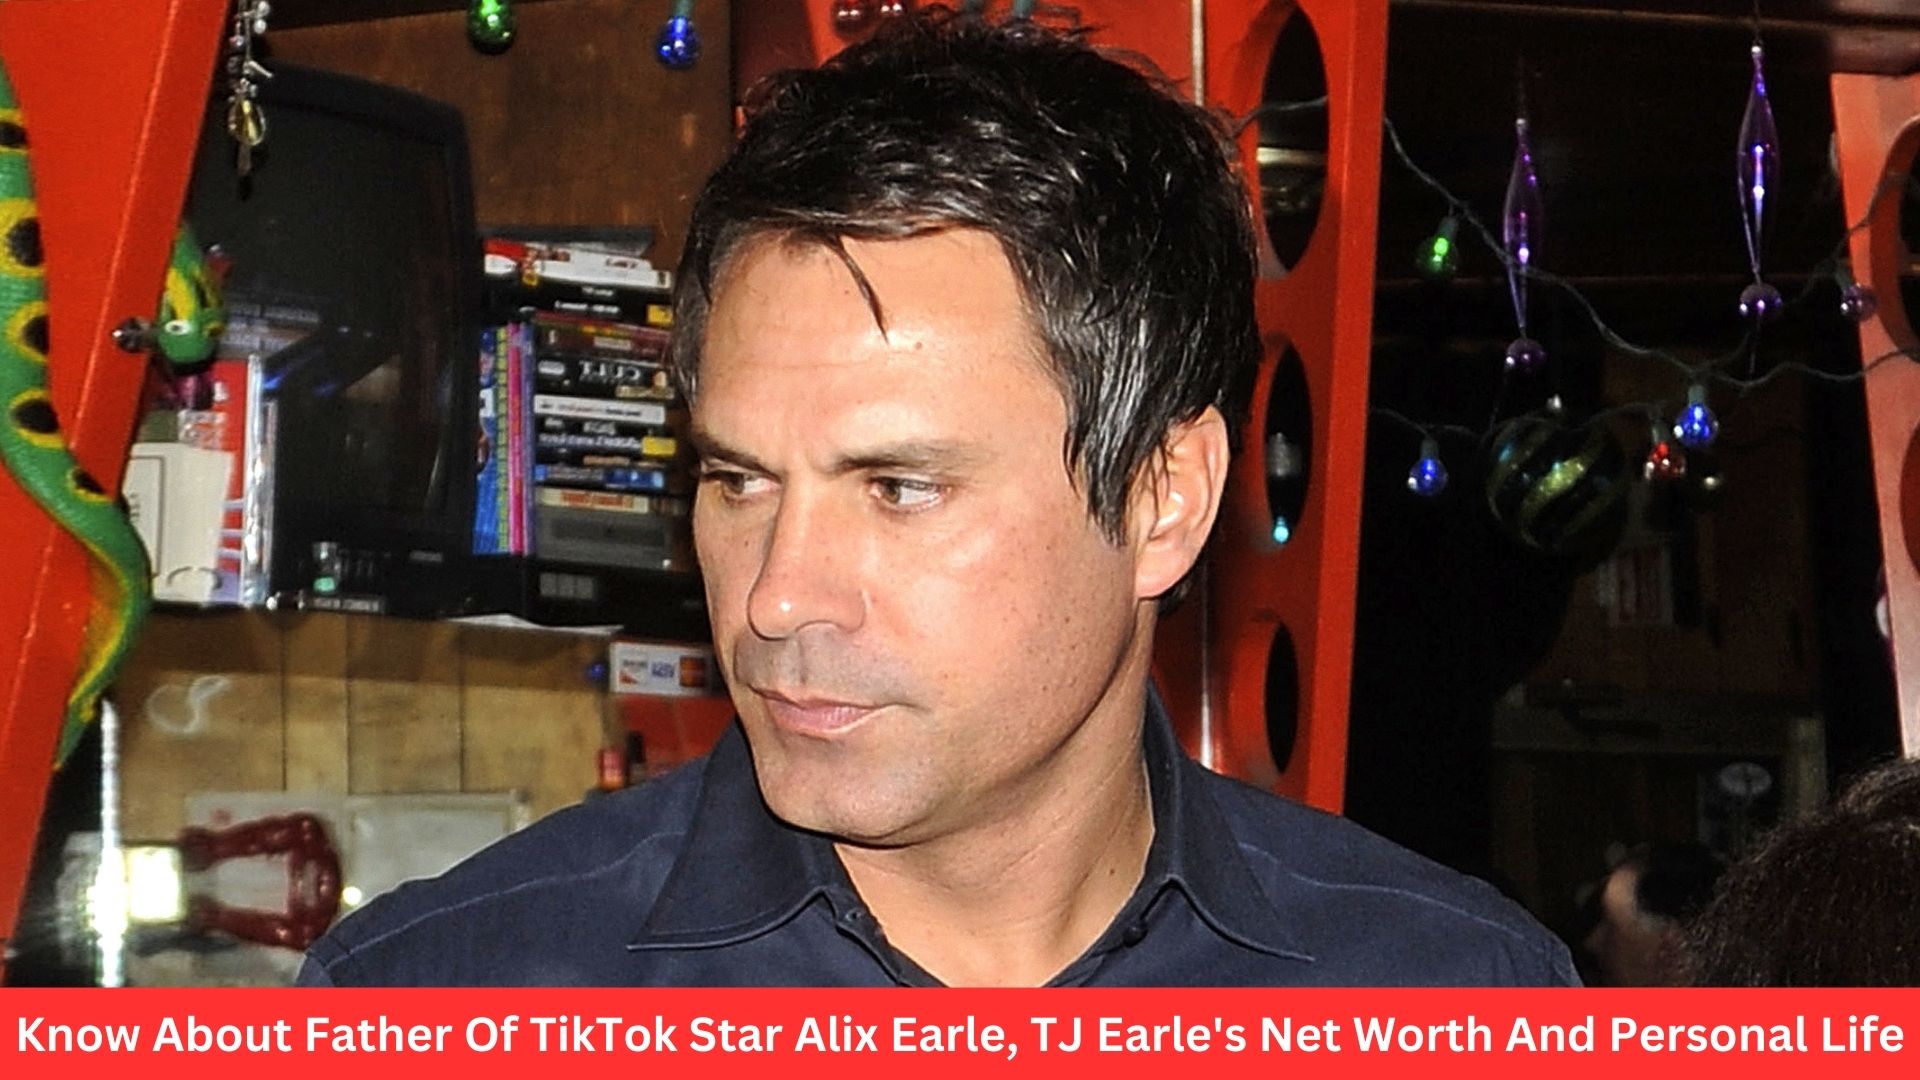 Know About Father Of TikTok Star Alix Earle, TJ Earle's Net Worth And Personal Life